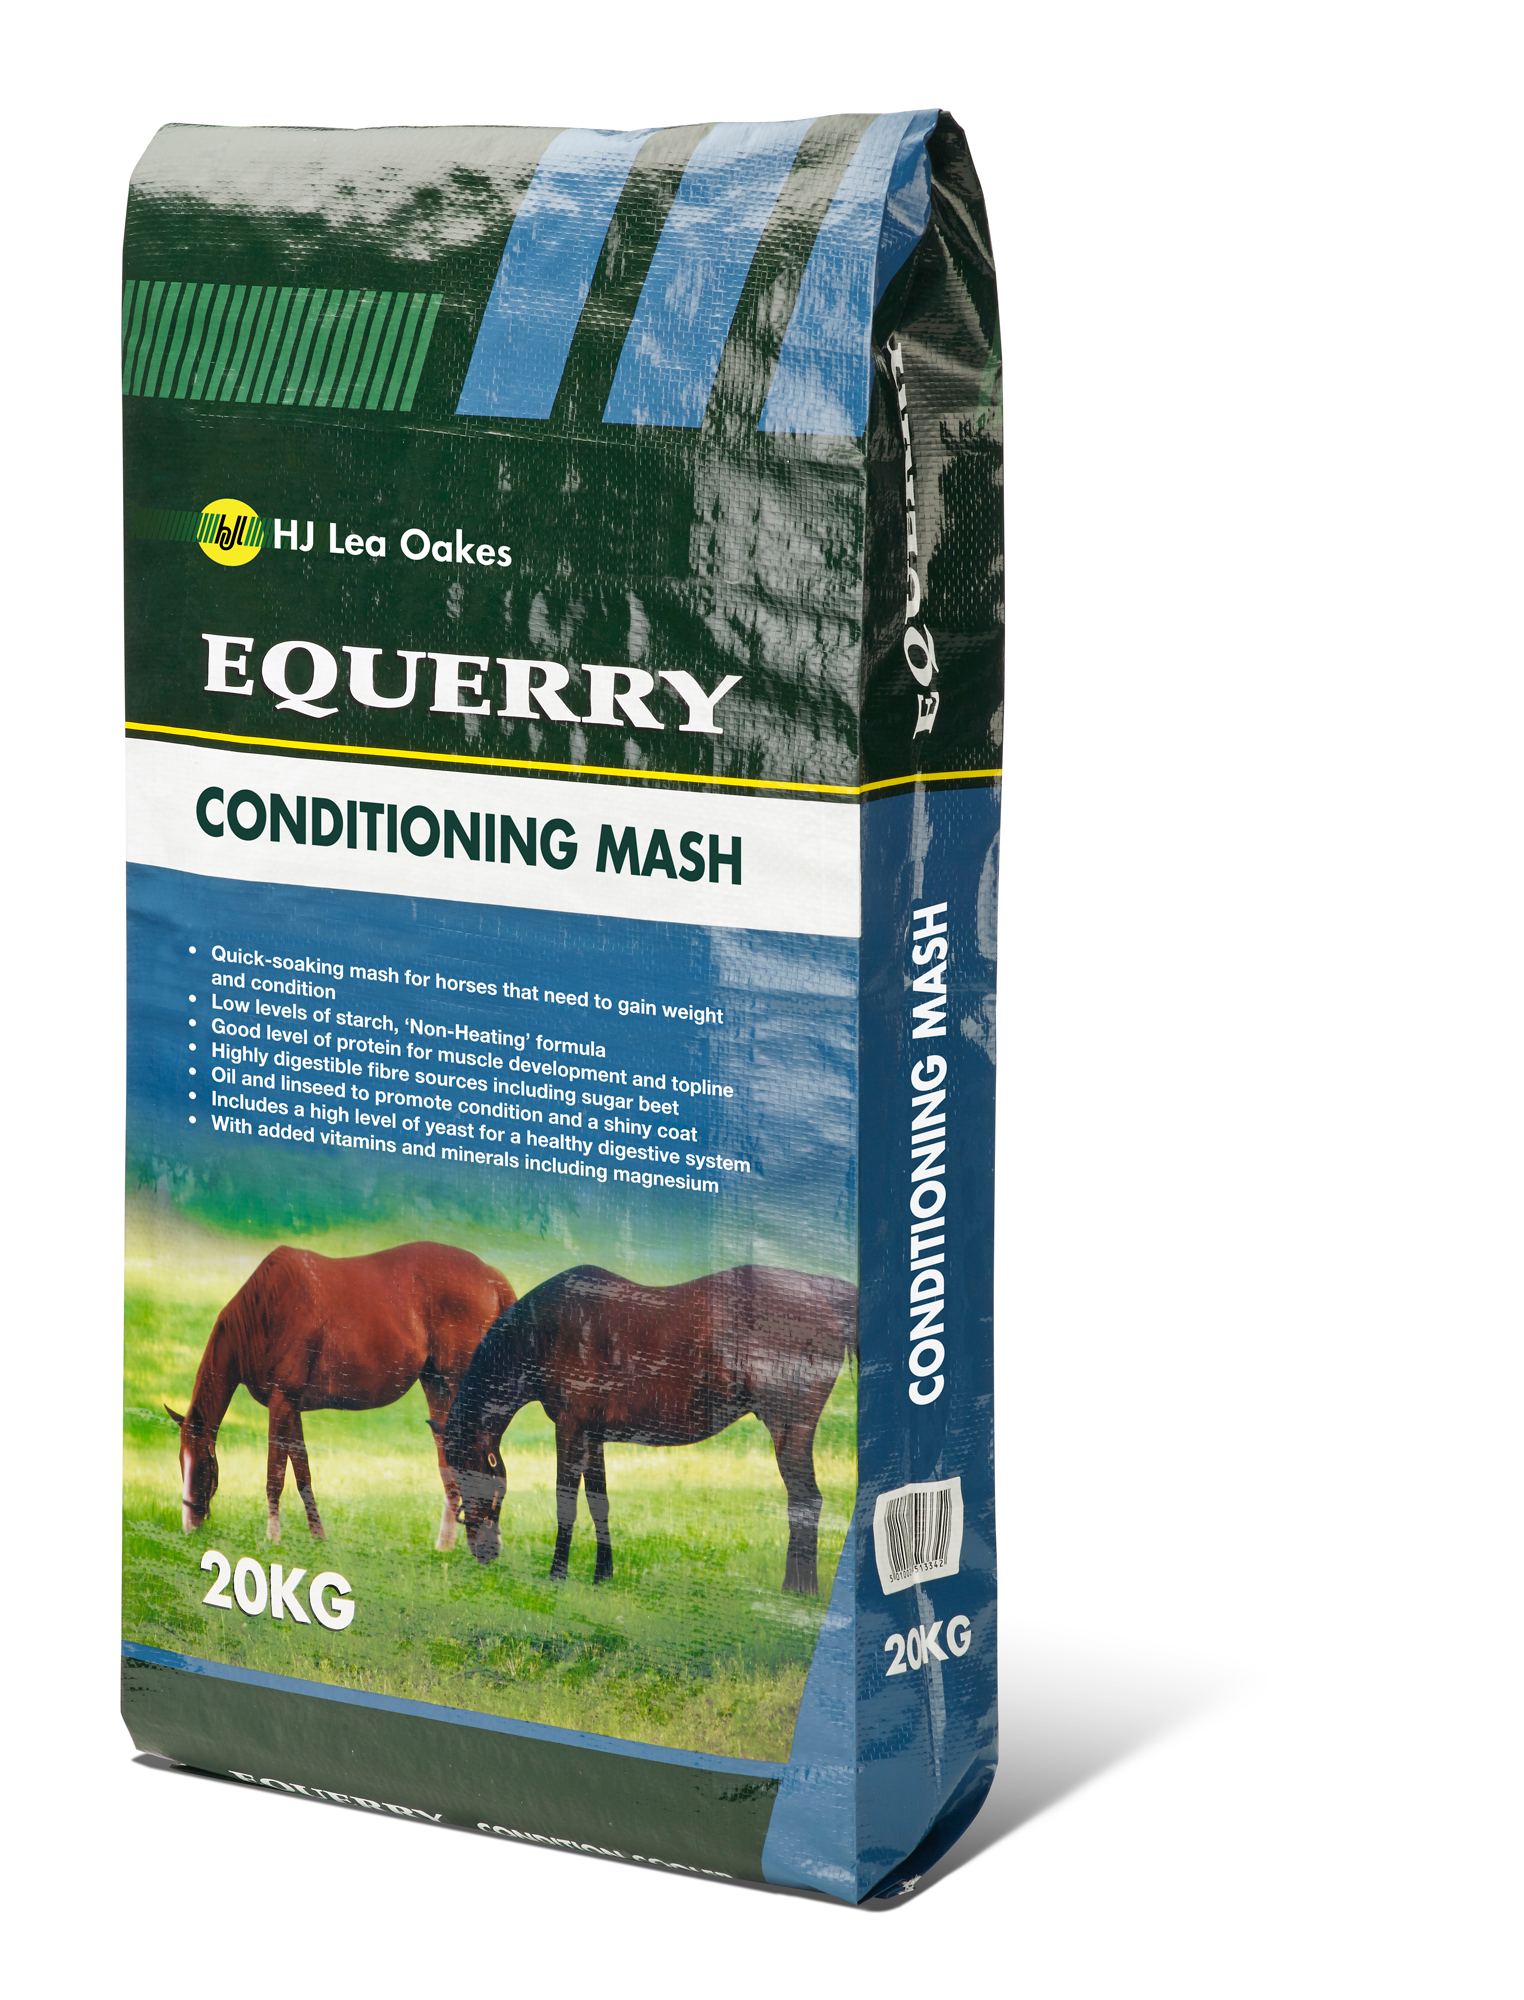 Equerry conditioning mash special offer